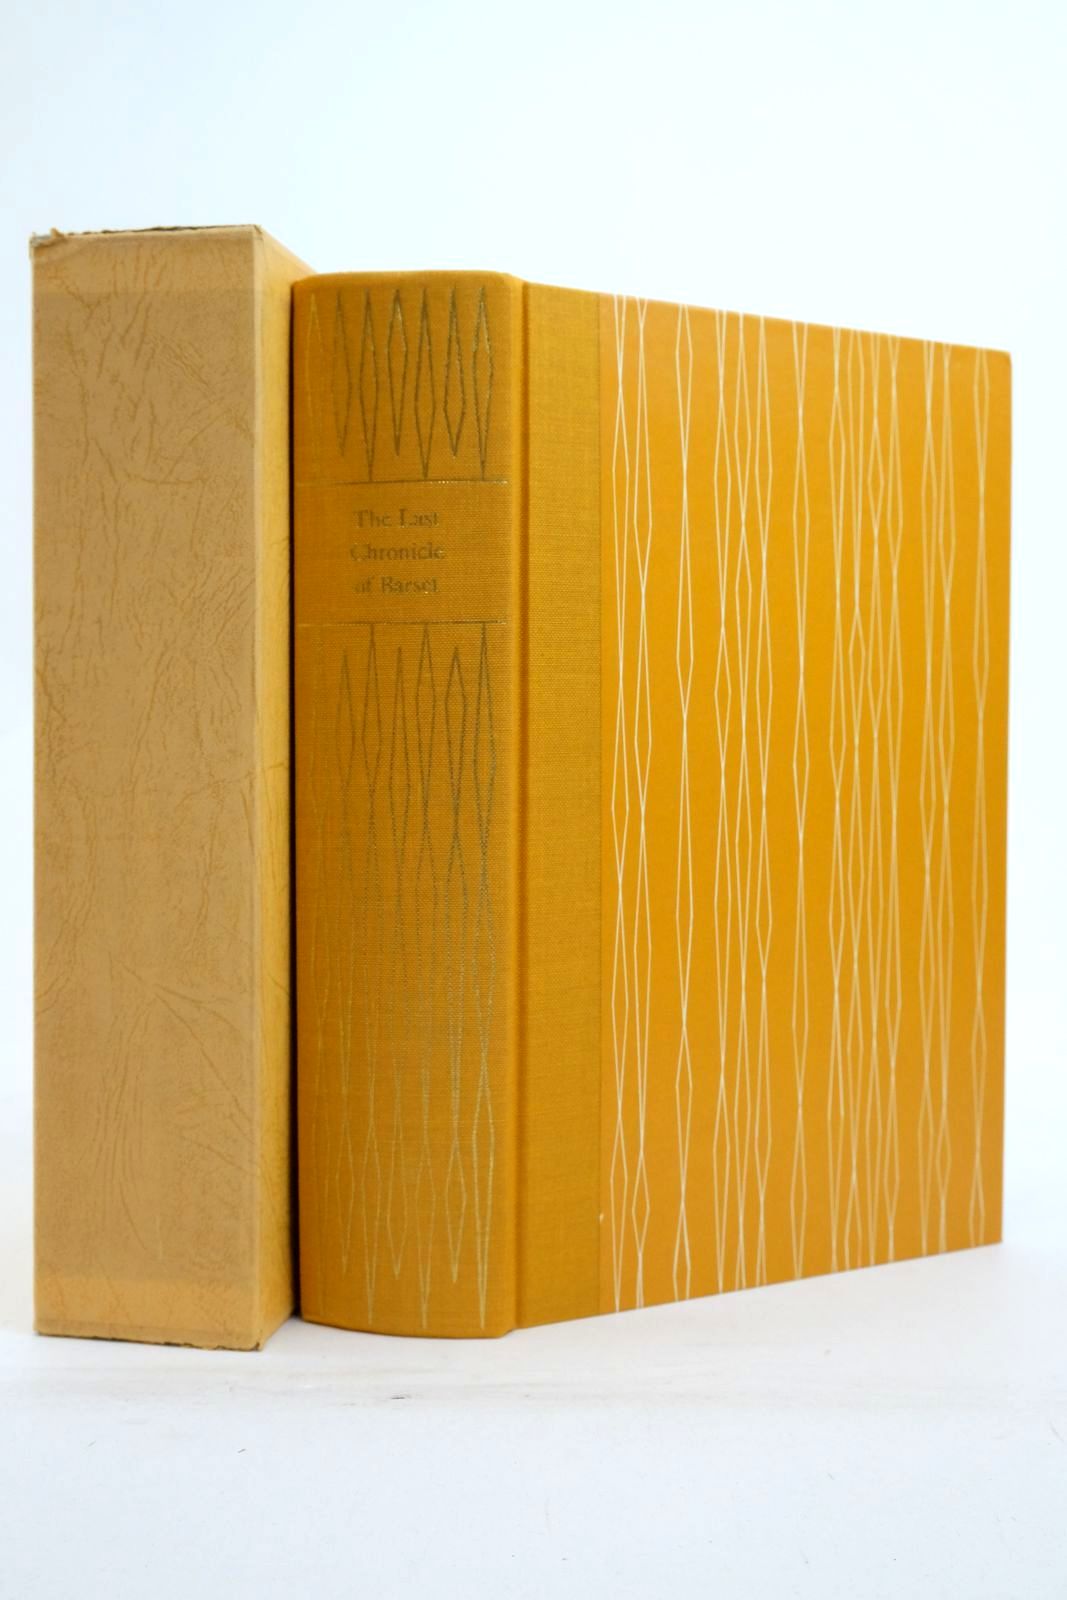 Photo of THE LAST CHRONICLE OF BARSET written by Trollope, Anthony Symons, Julian illustrated by Reddick, Peter published by Folio Society (STOCK CODE: 2138214)  for sale by Stella & Rose's Books